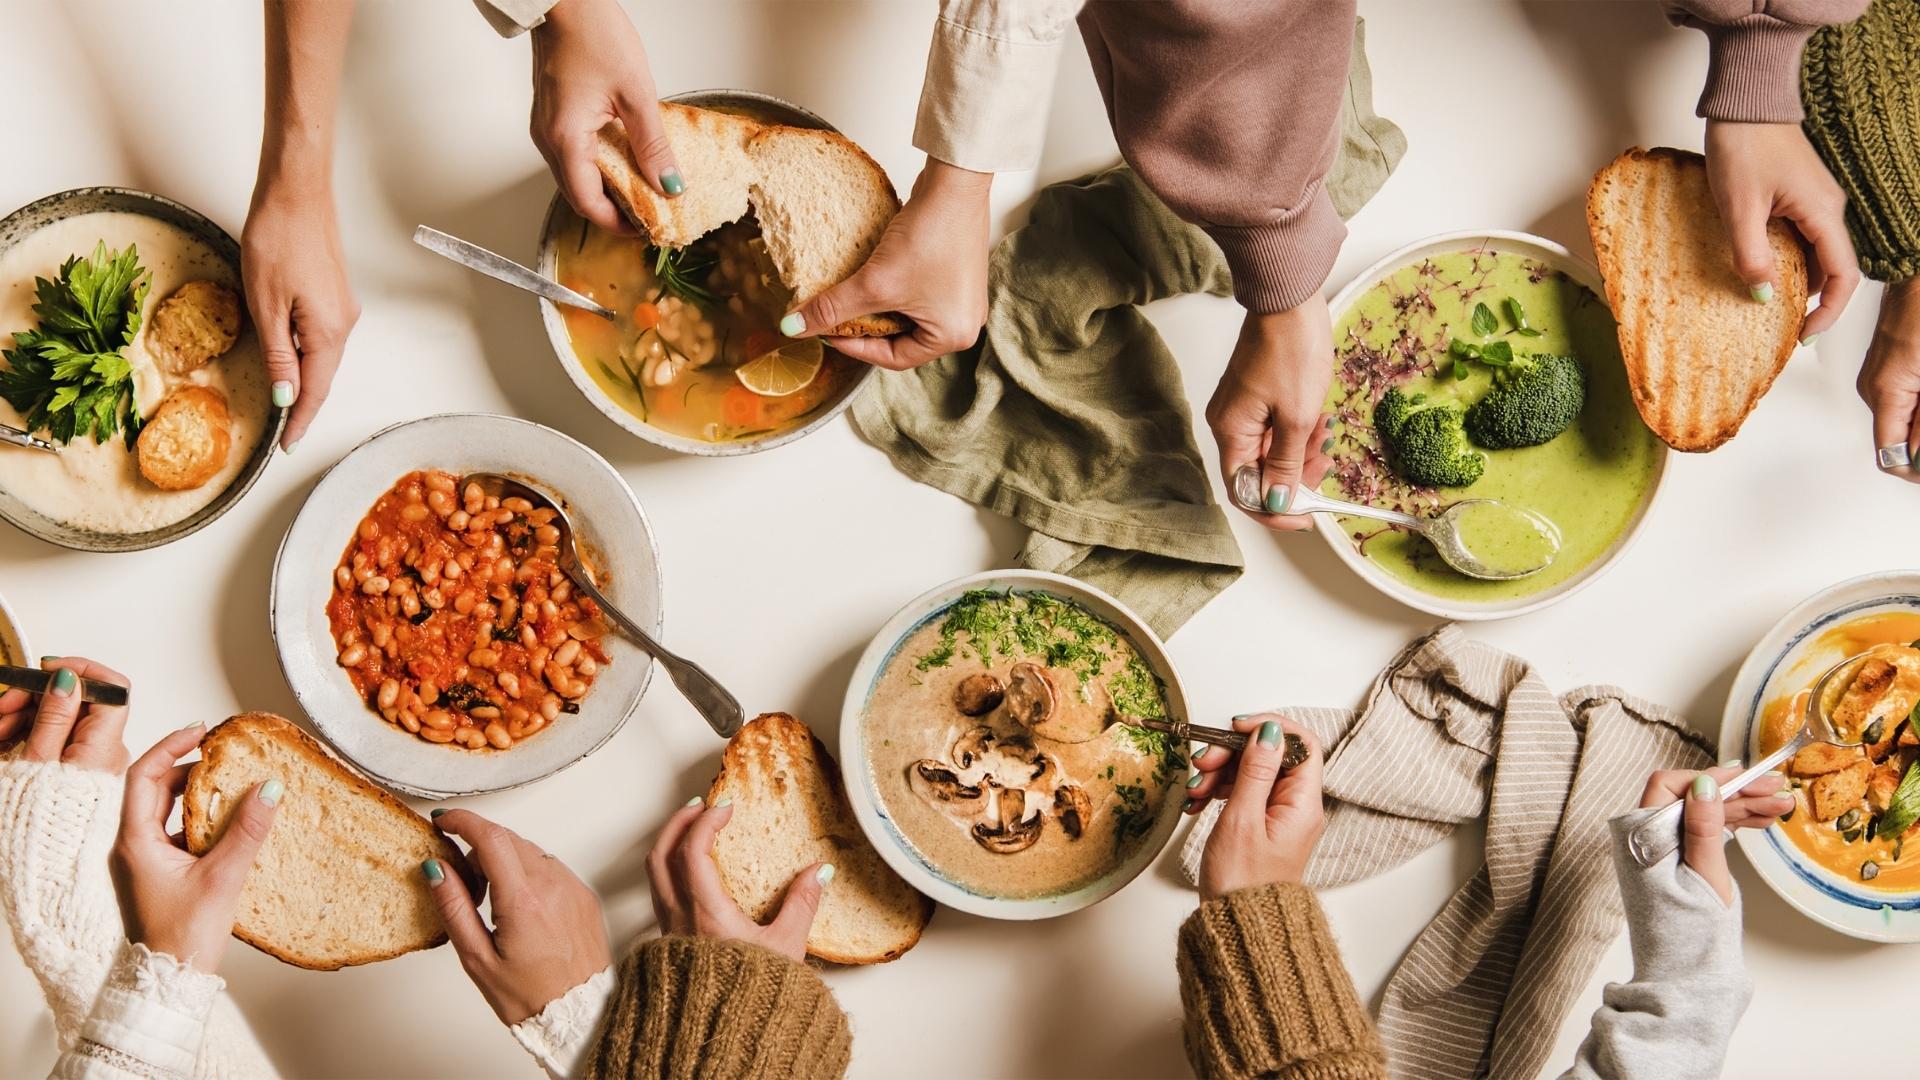 A banner of various bowls of plant-based food on a table with many different hands holding food and slices of bread.